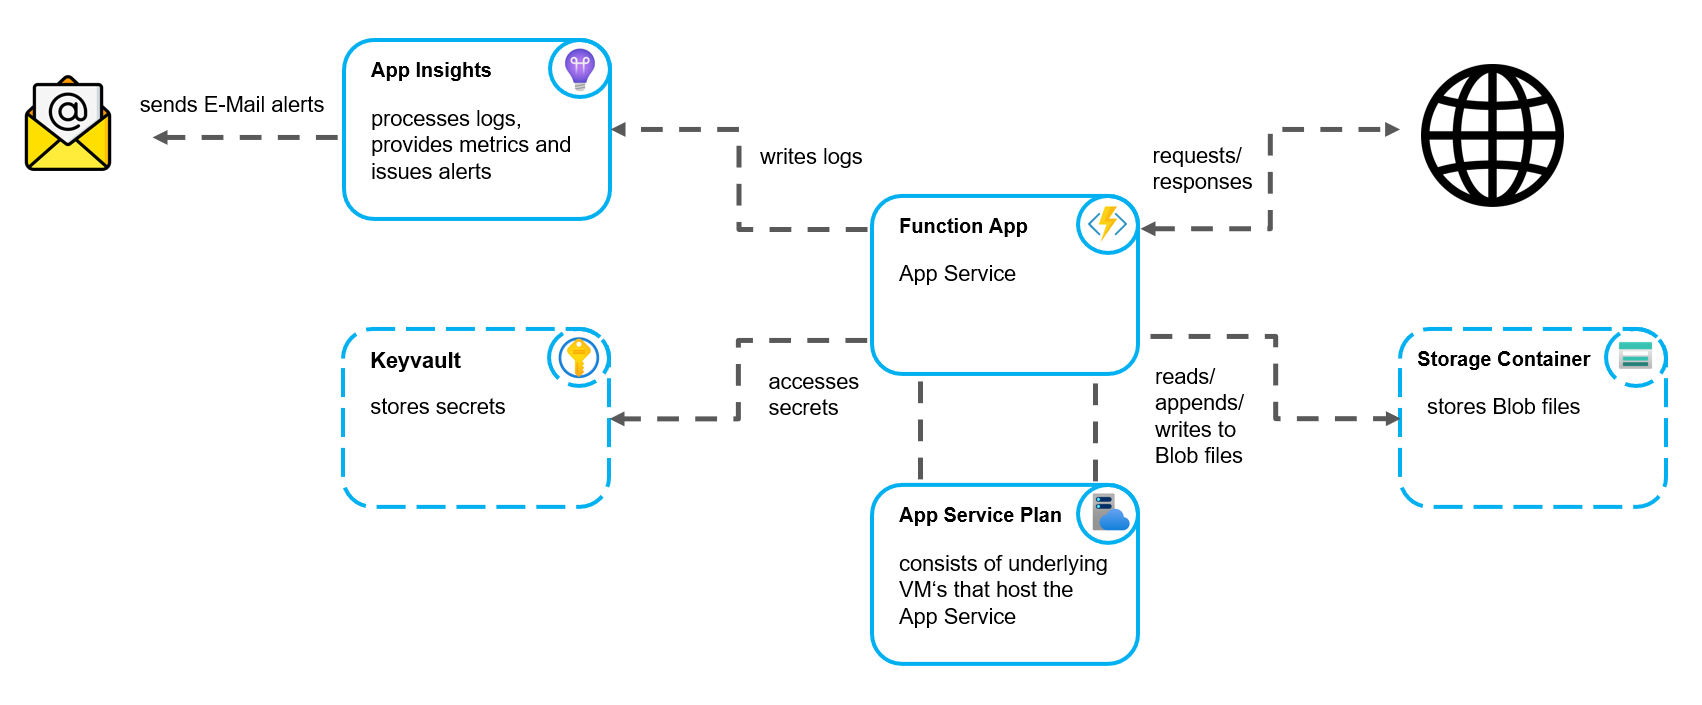 overview diagramm of resulting Azure architecture as setup by the script